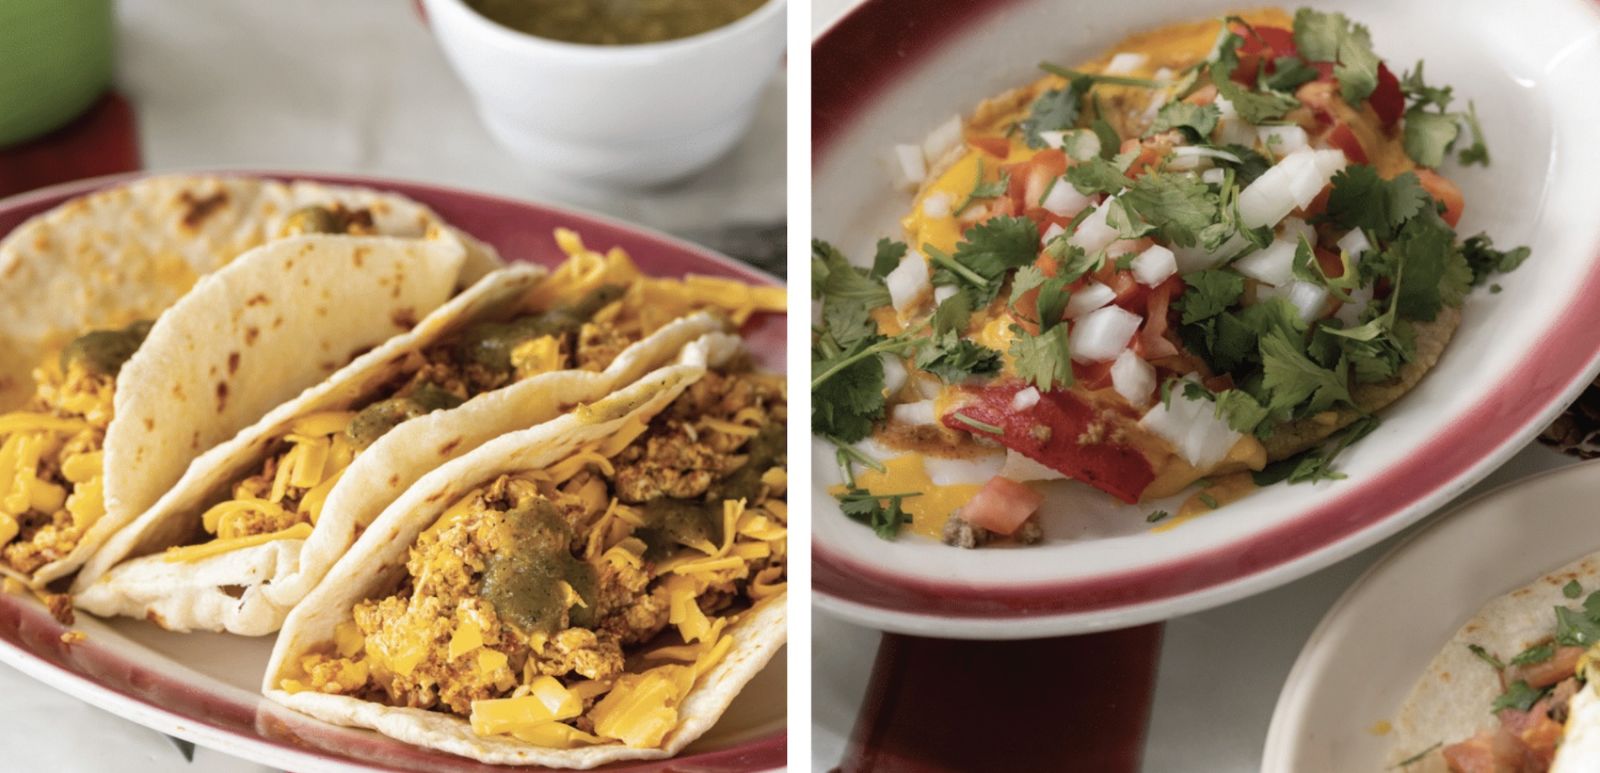 A Love Letter to San Antonio’s Breakfast Tacos